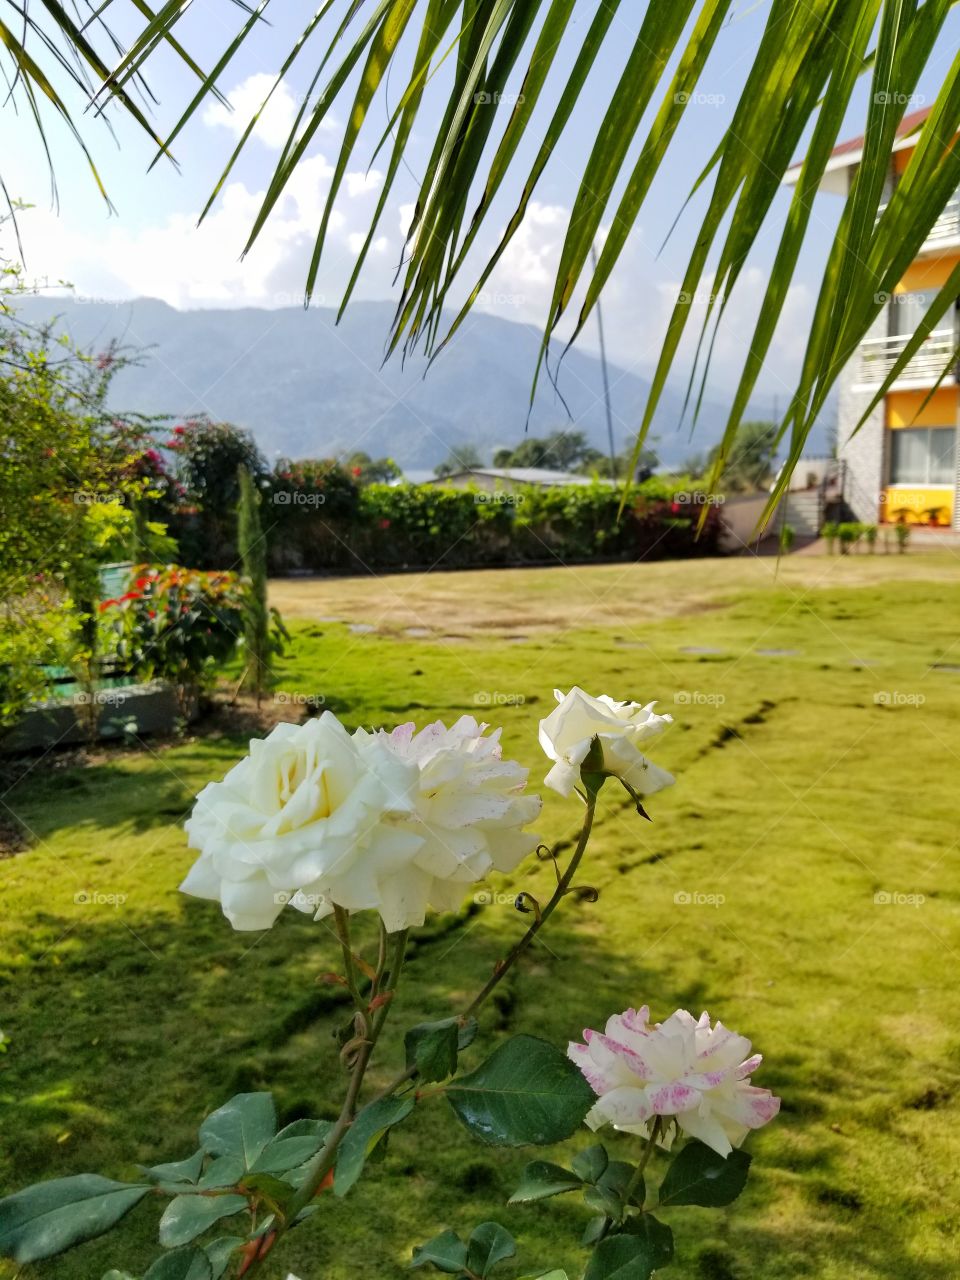 Beautiful white roses in Pokara, Nepal with the foothills and Phewa Lake in the background.